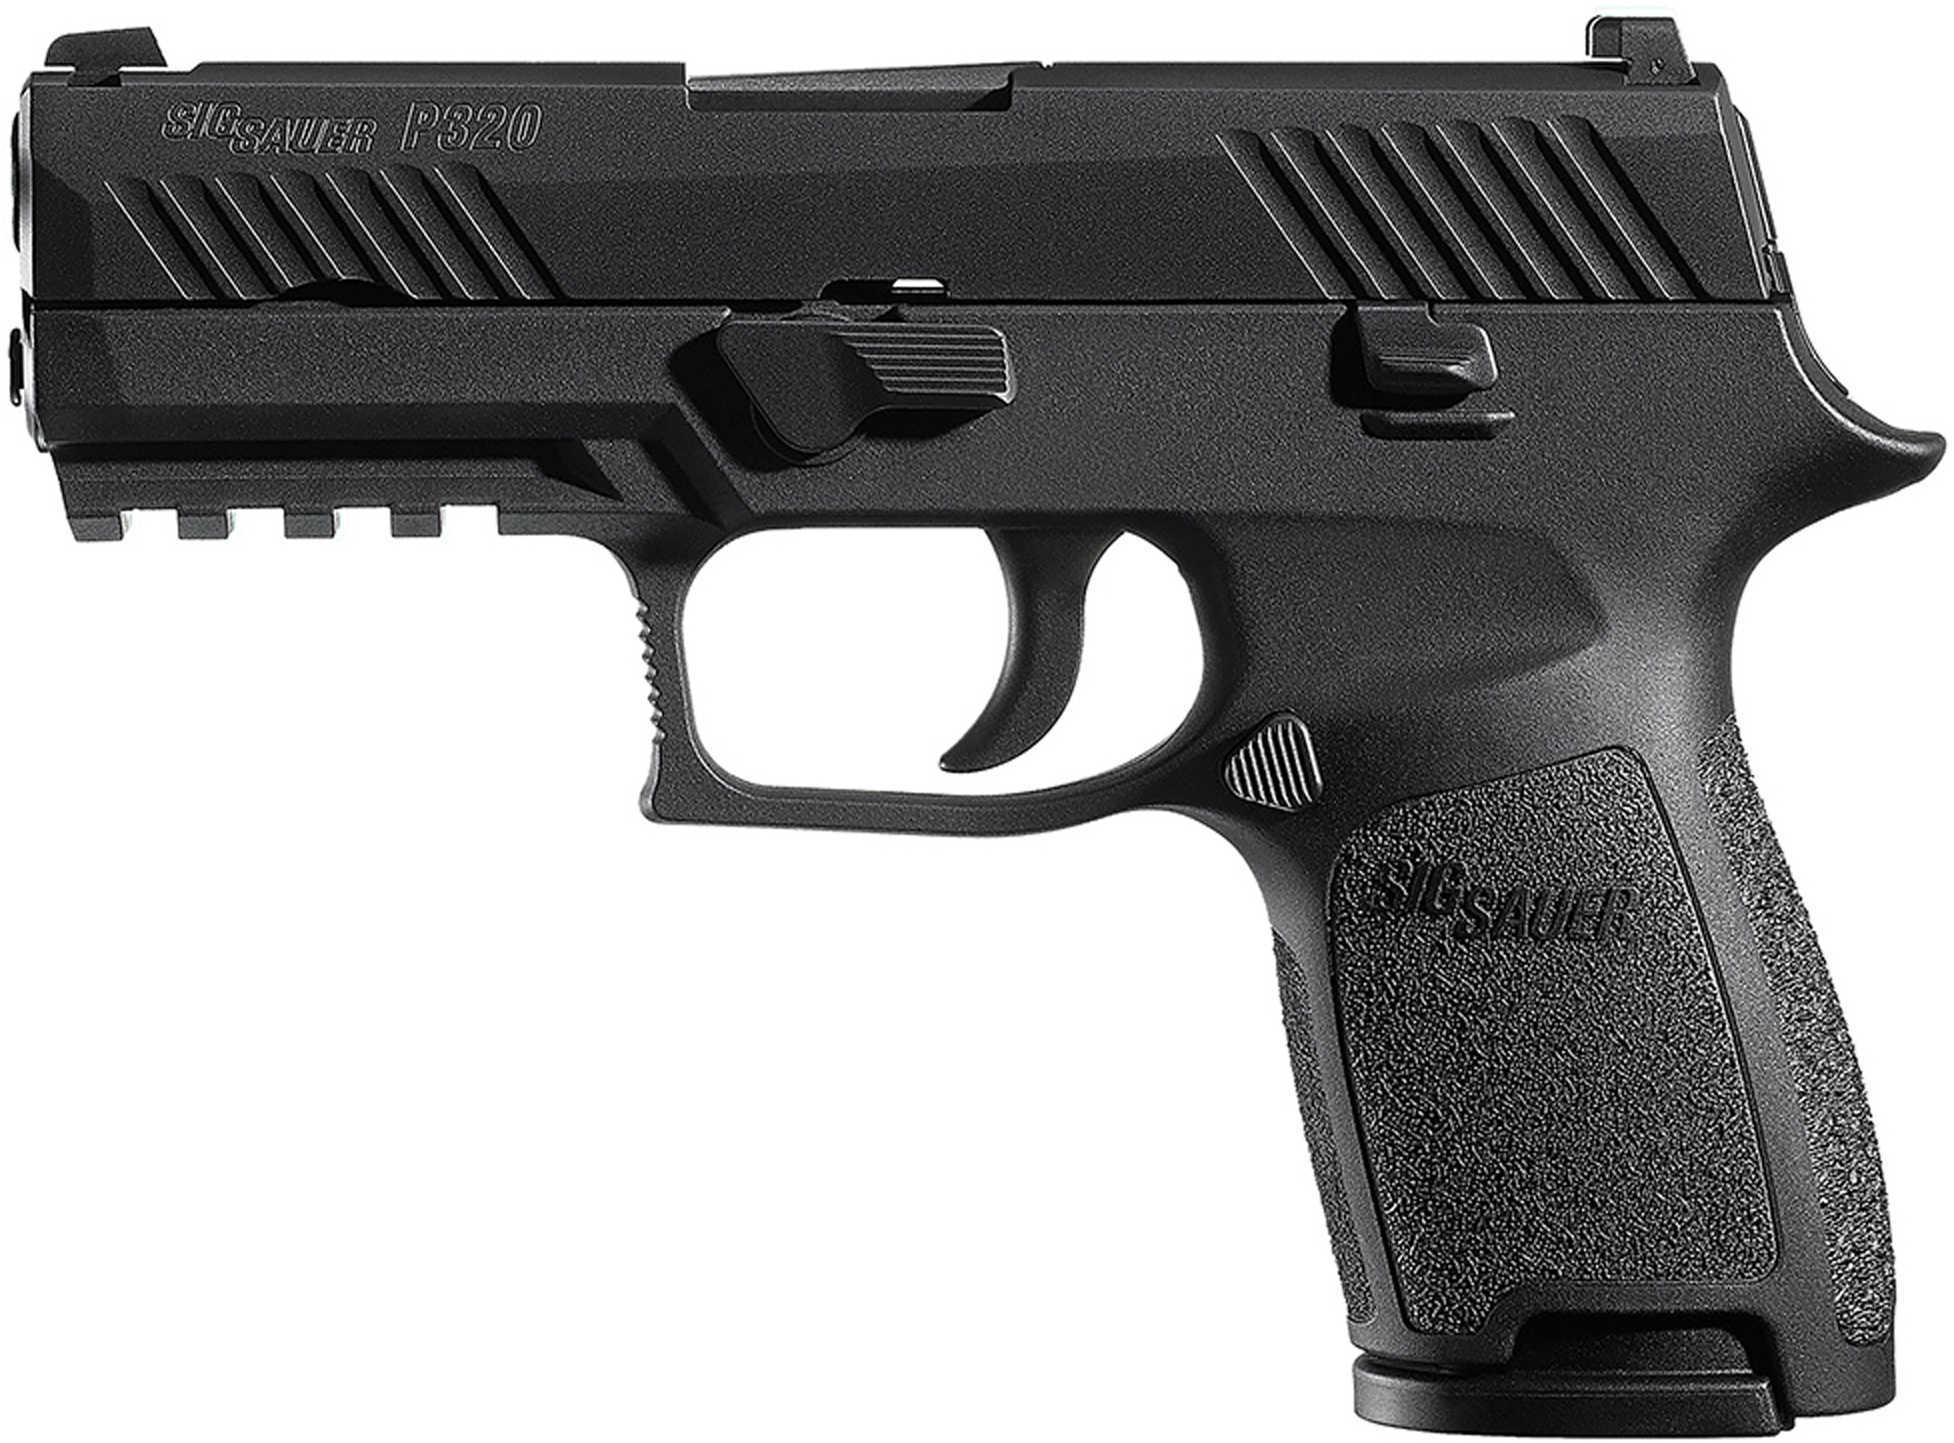 Sig Sauer Compact P320 45 ACP Black Finish 9 Round 3.9" Barrel Modular Striker-Fired Double Action Only Semi Automatic Pistol 320C45B